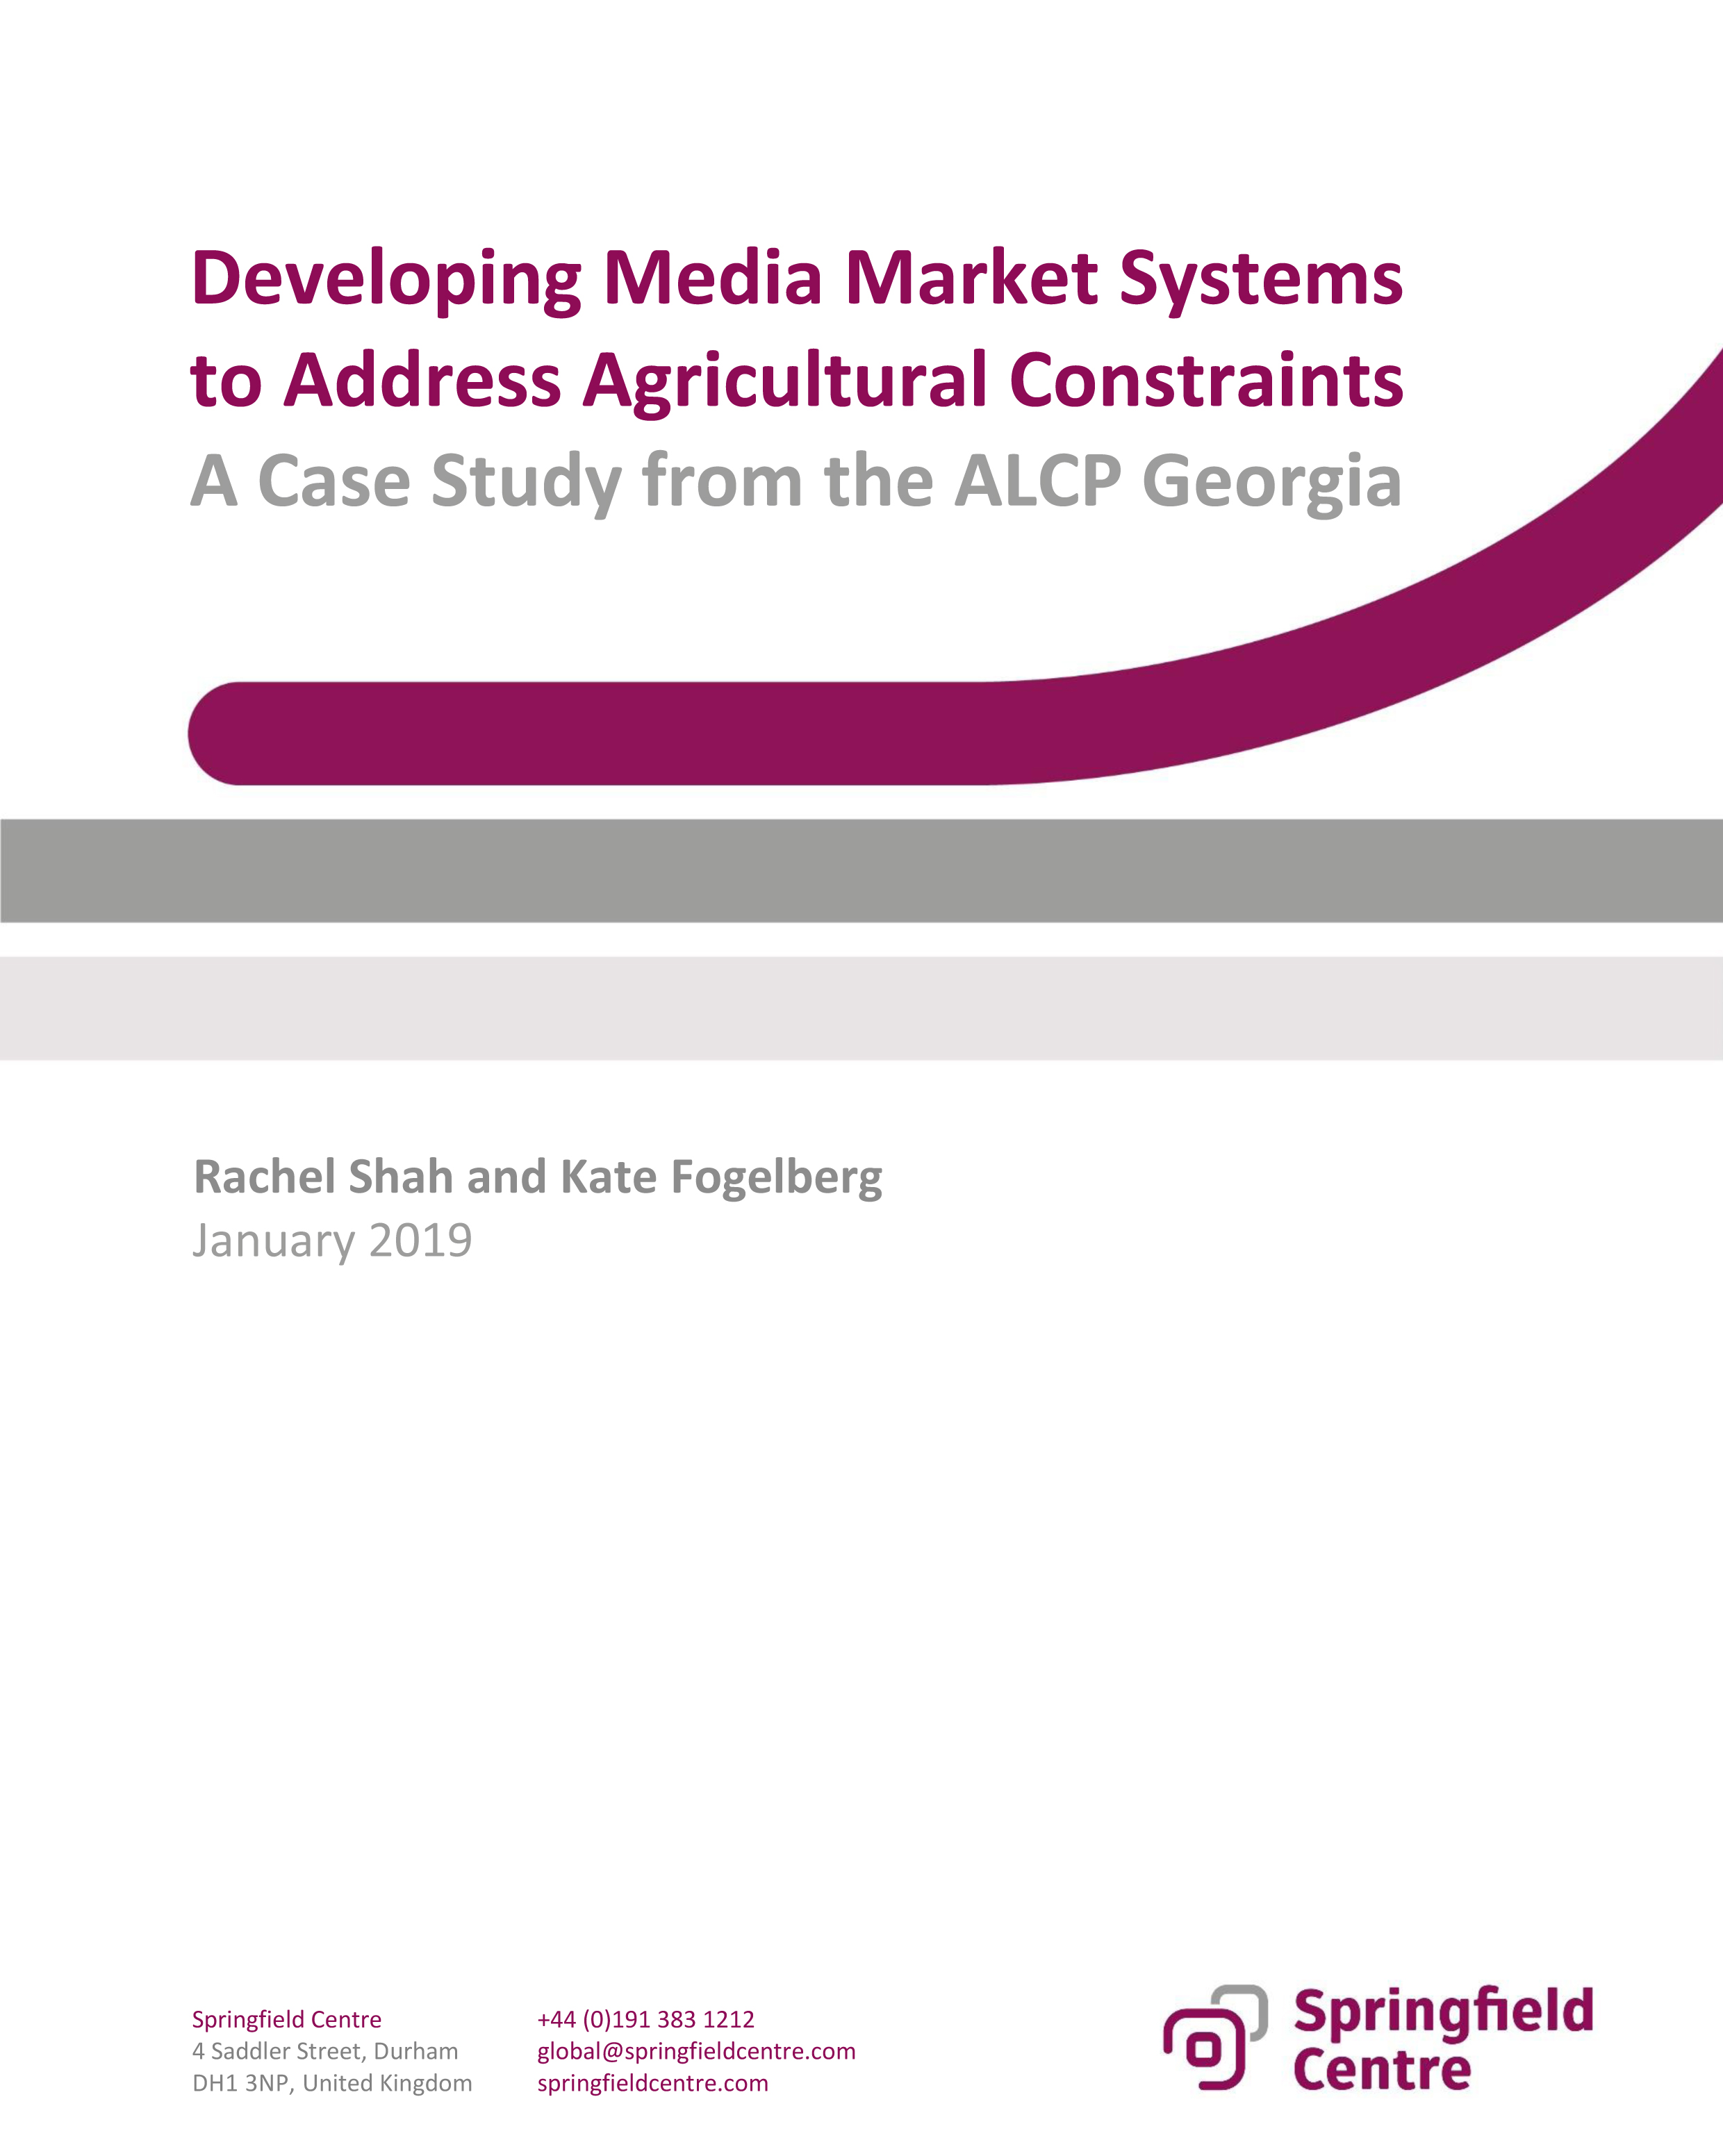 Developing Media Markets to Address Agricultural Constraints Case Study-January 2019